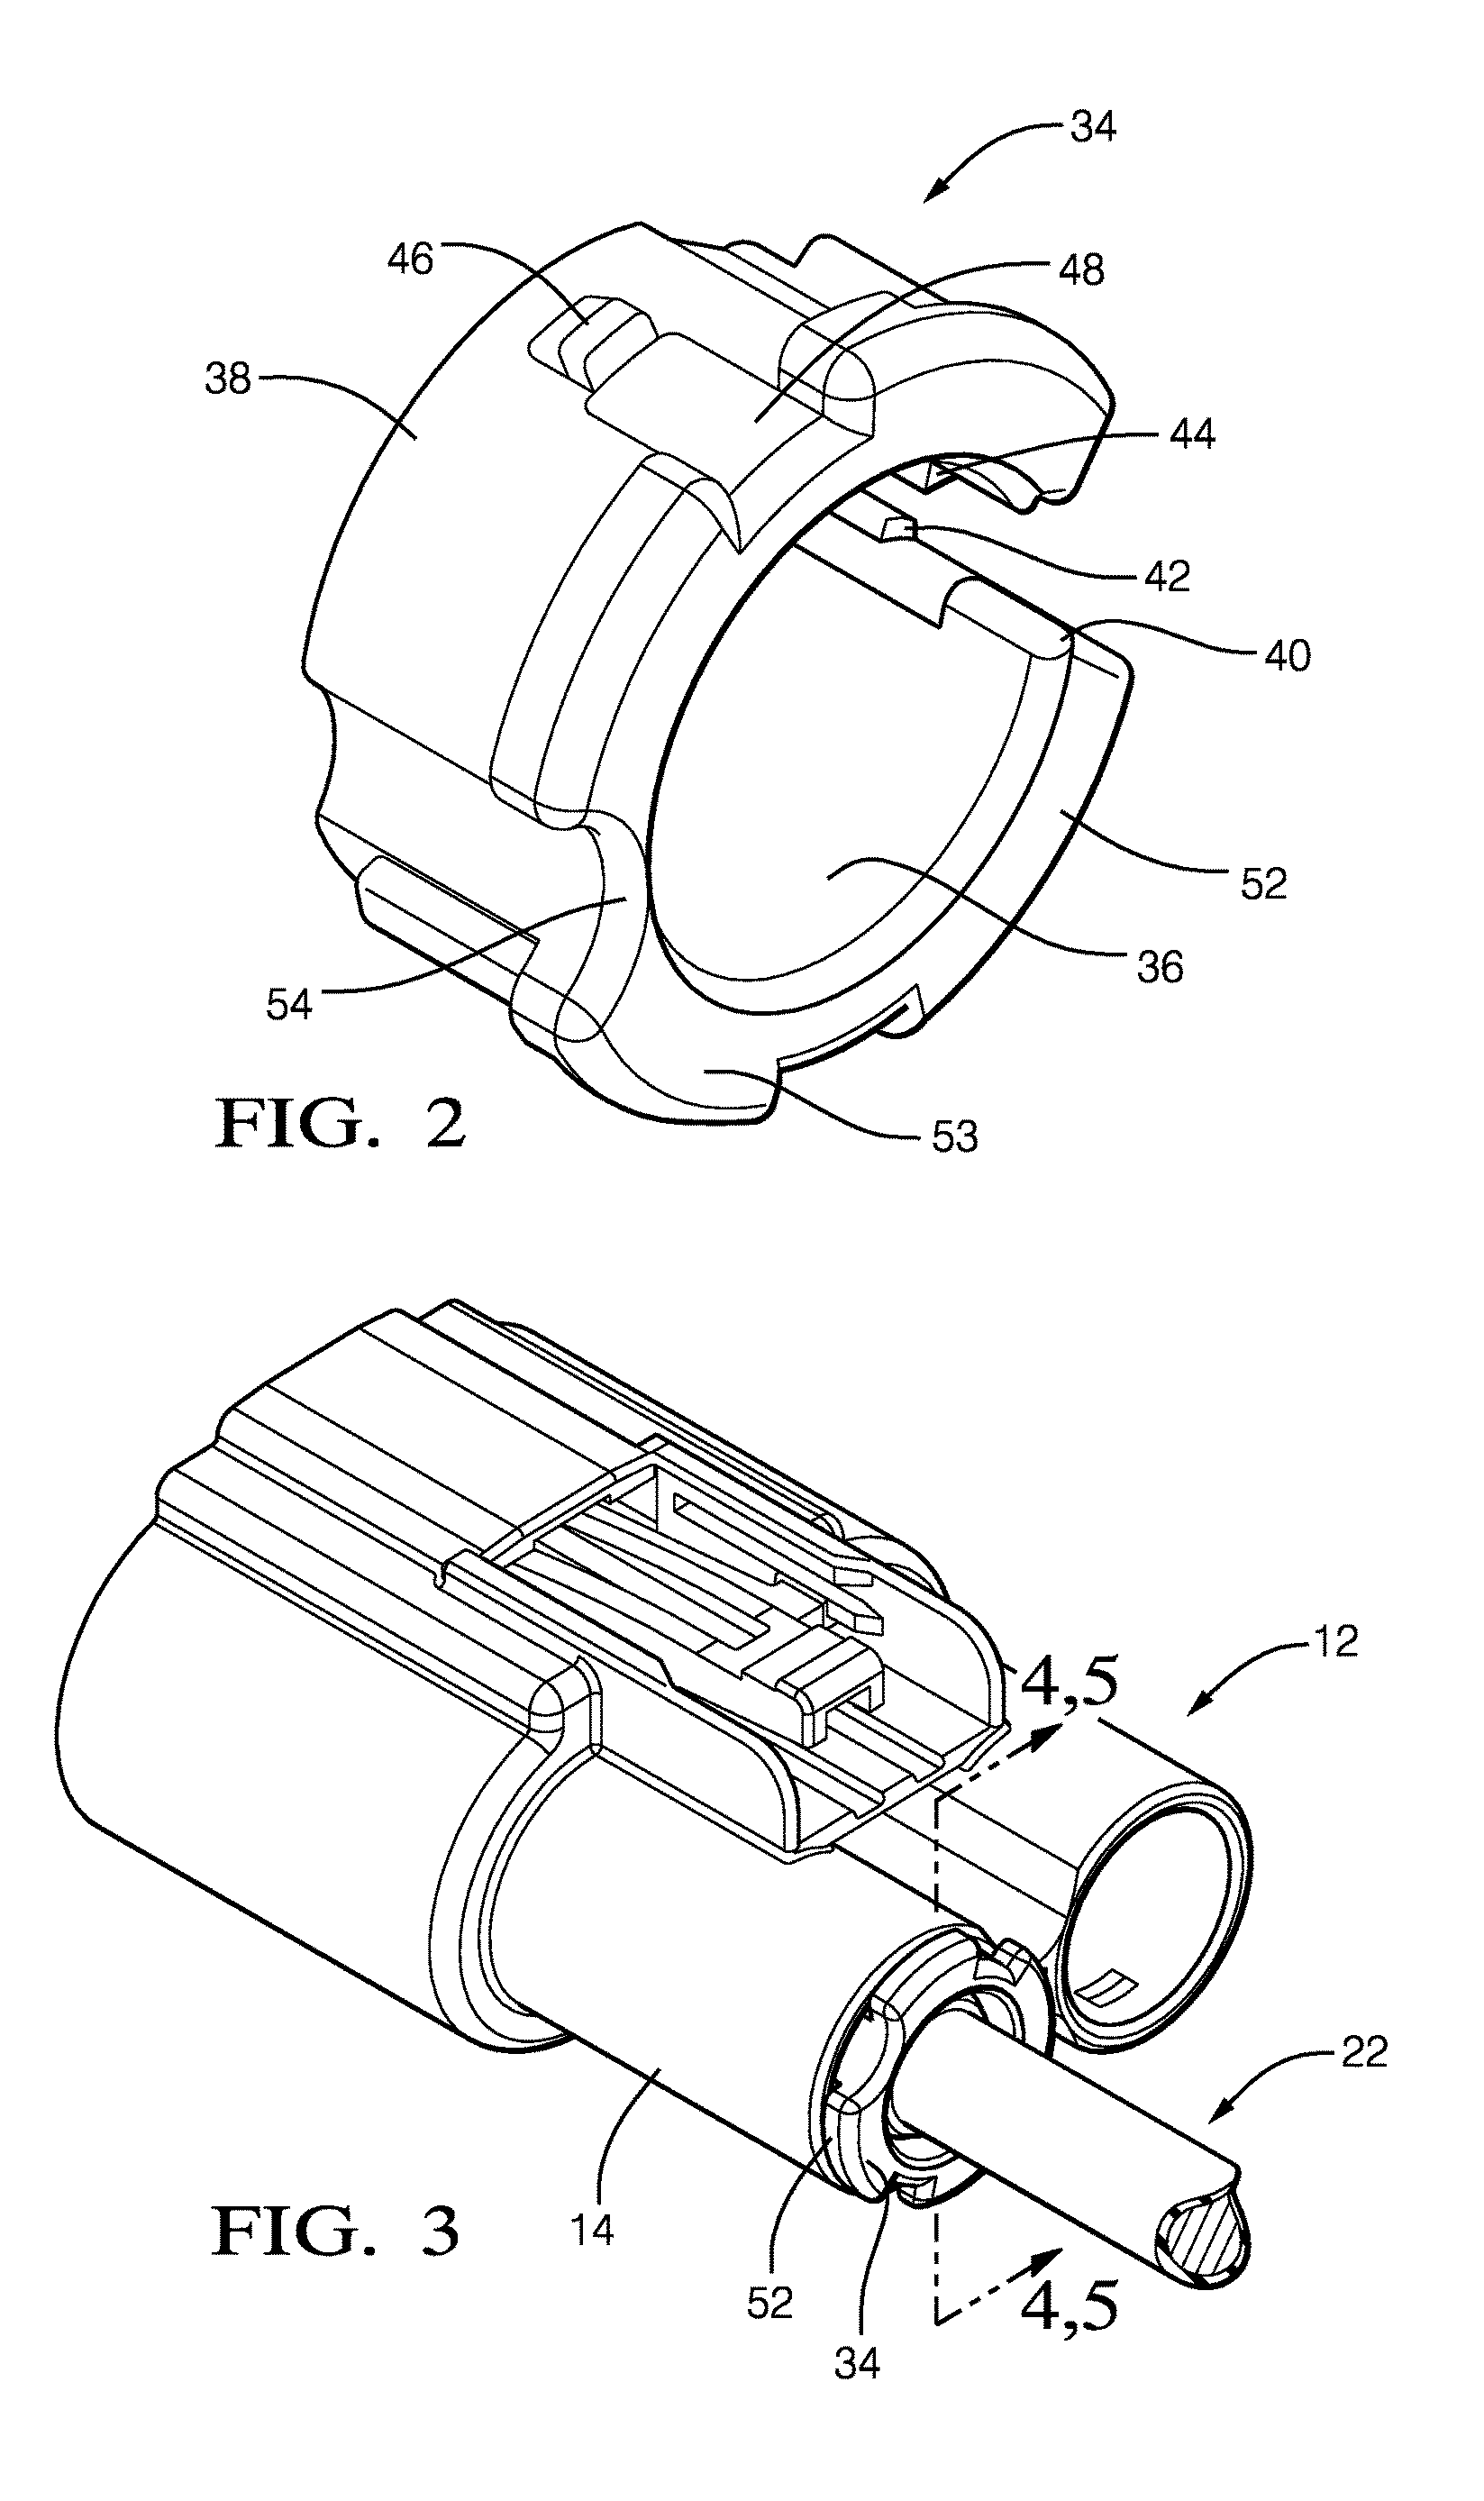 Sealed connector with an extended seal sleeve and an anti-water pooling retainer